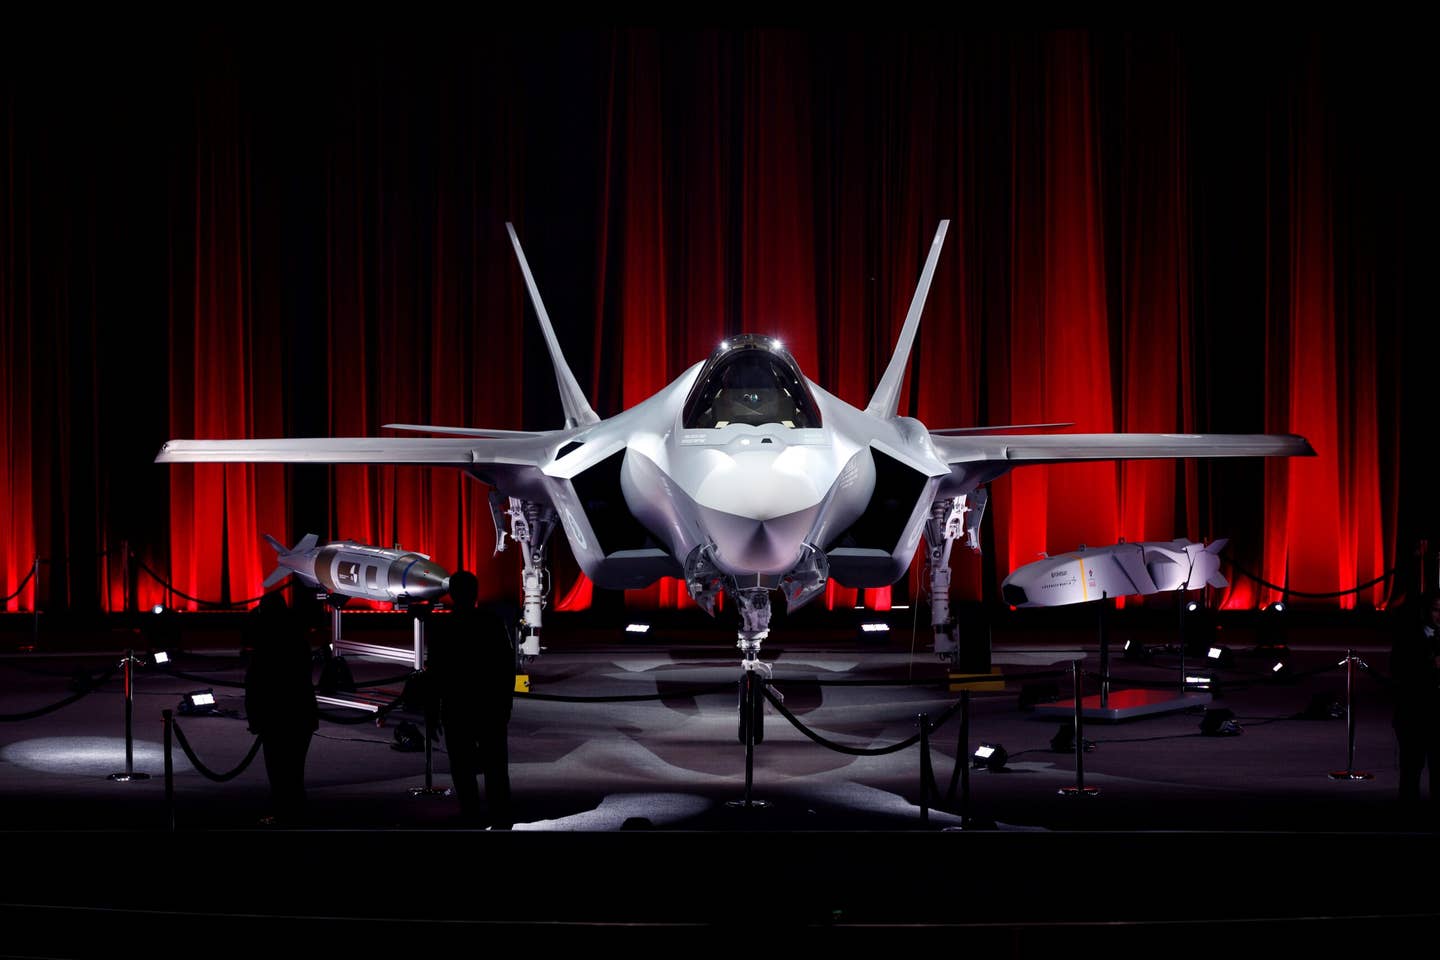 The first F-35A fighter for Turkey during its official rollout ceremony at the Lockheed Martin production facility in Forth Worth, Texas, on June 21, 2018. <em>Photo by Atilgan Ozdil/Anadolu Agency/Getty Images</em>